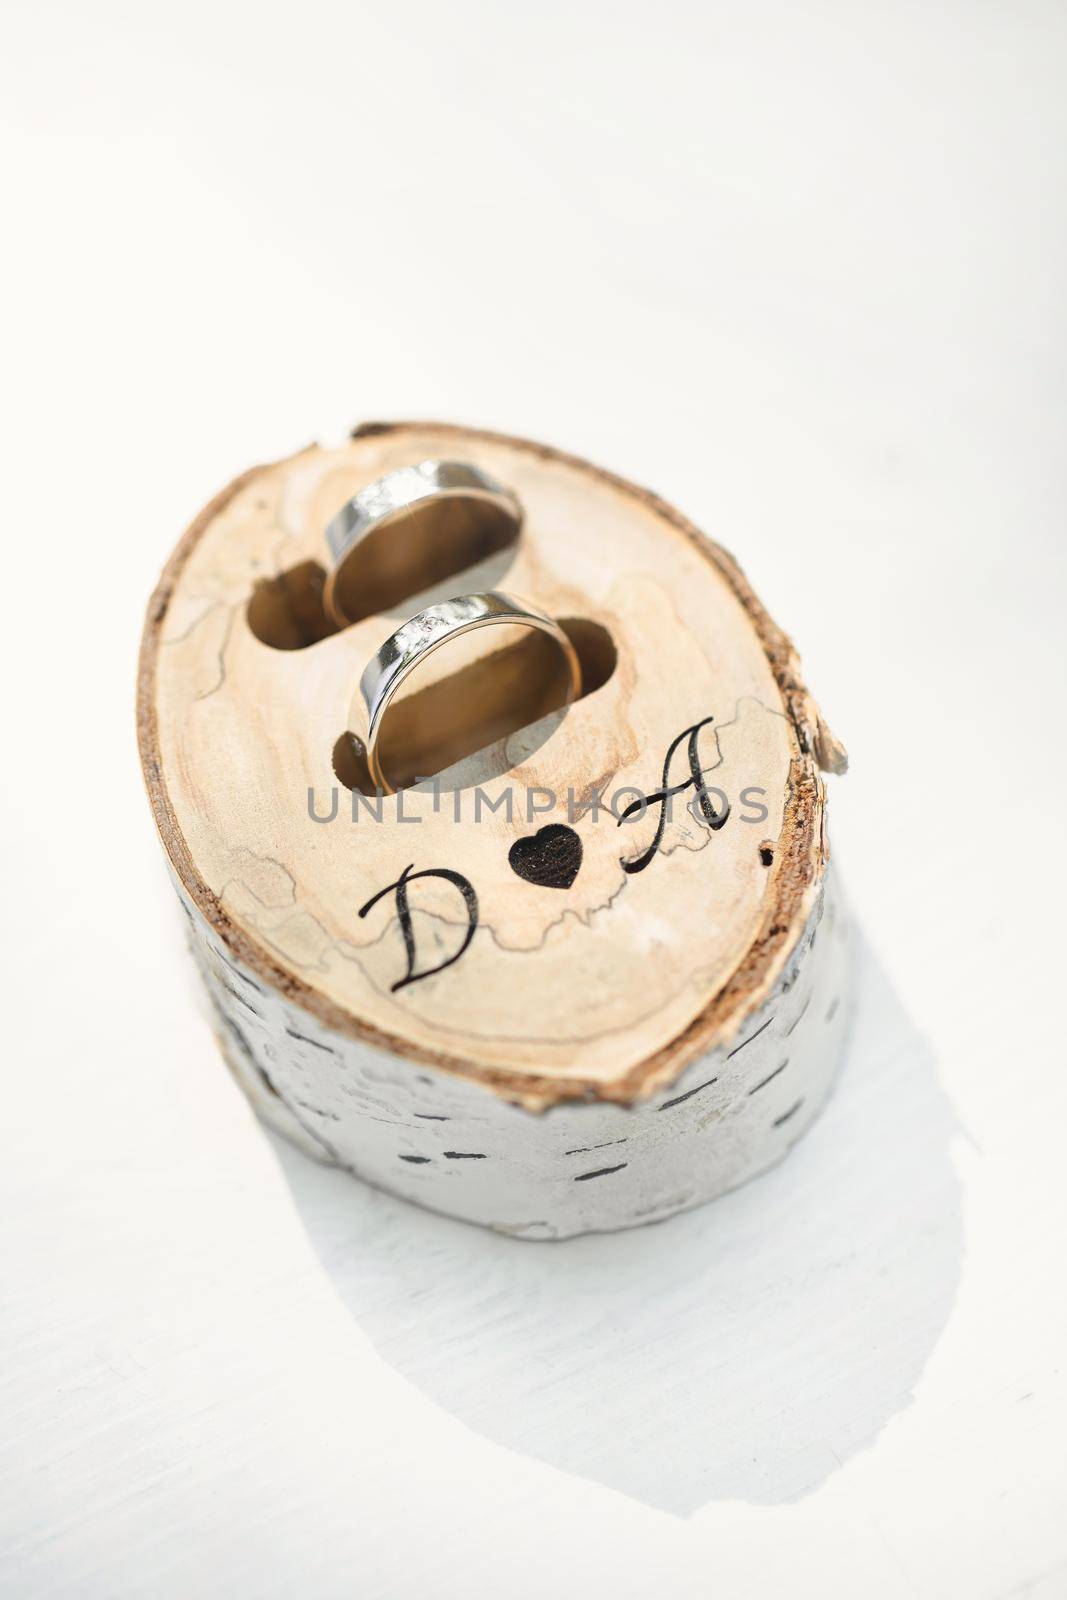 Wedding rings in a box made of birch wood with initials